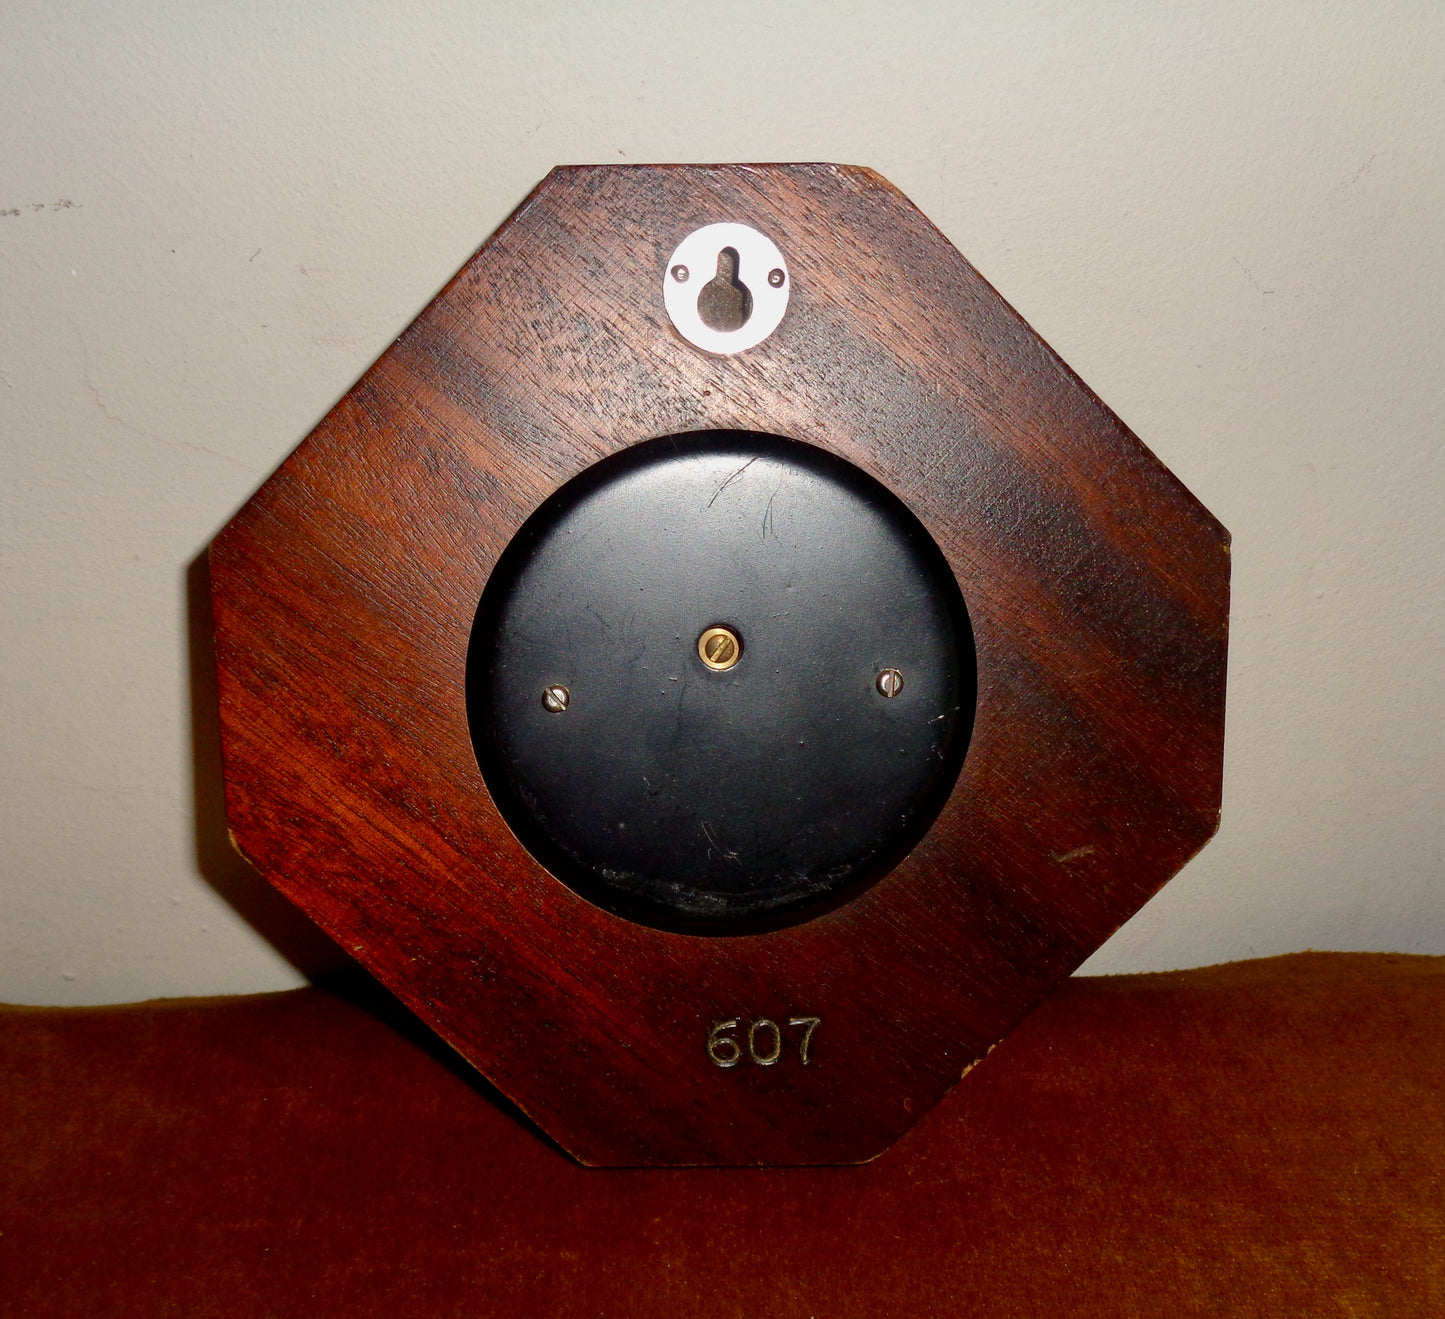 1960s Short & Mason Stormoguide Wall Mounted Barometer In An Octagonal Wood Surround